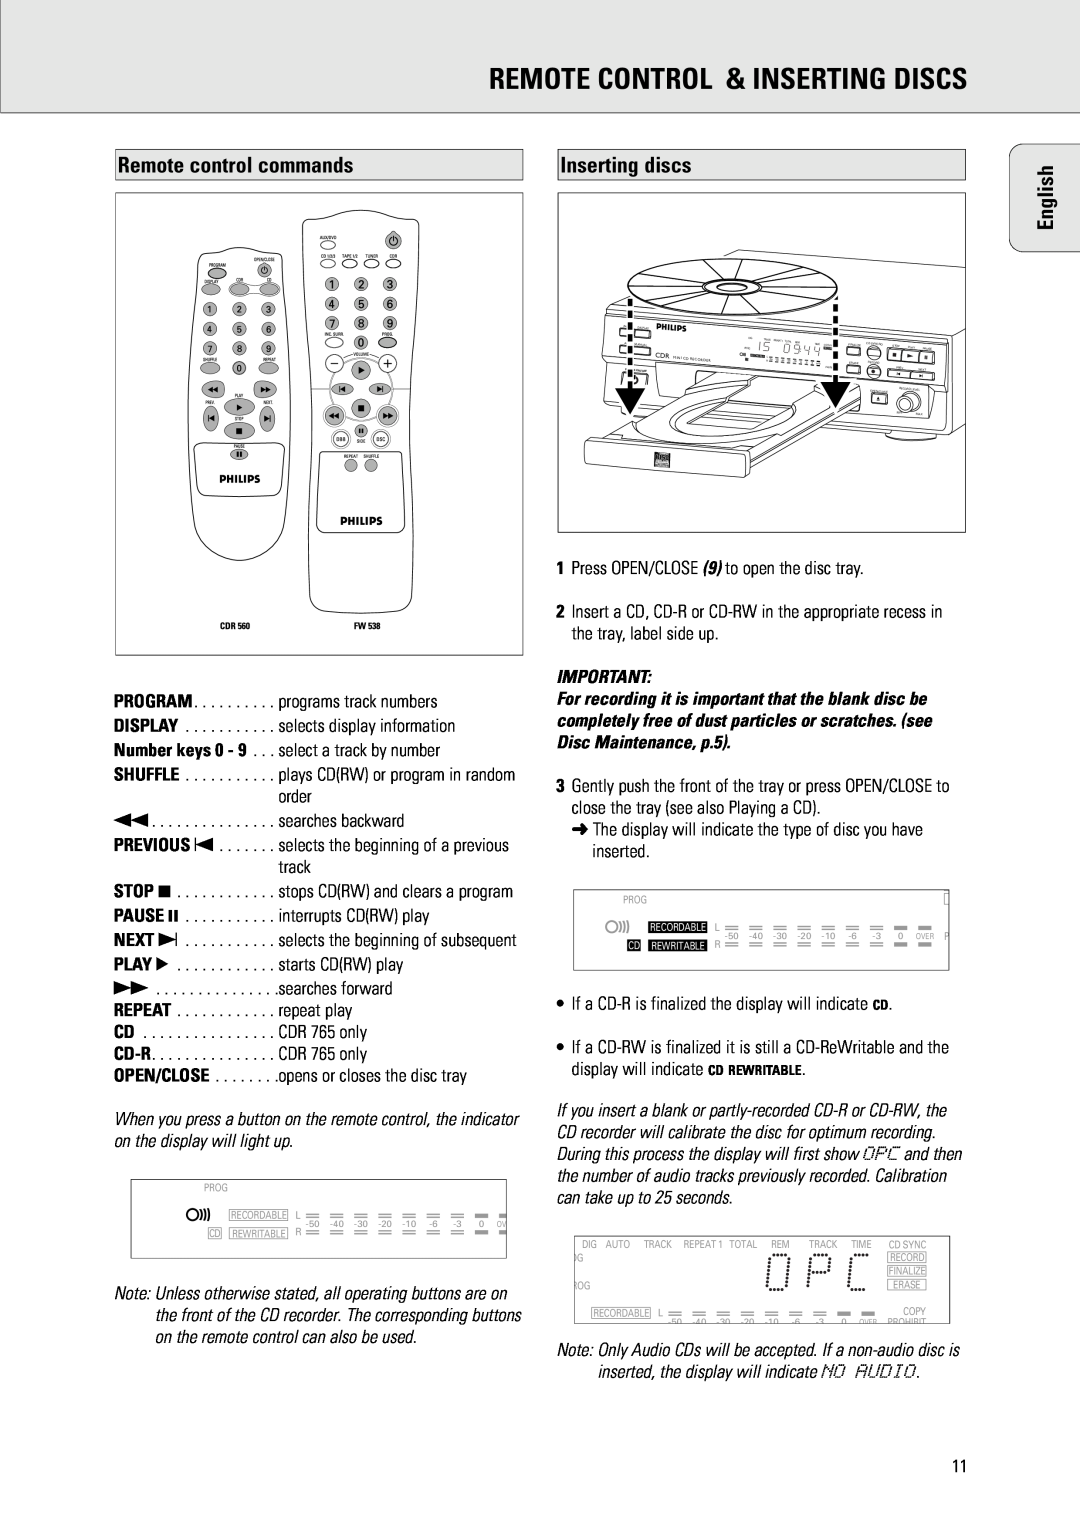 Philips CDR 538, CDR 560 manual Remote Control & Inserting Discs, Remote control commands, Inserting discs, English 